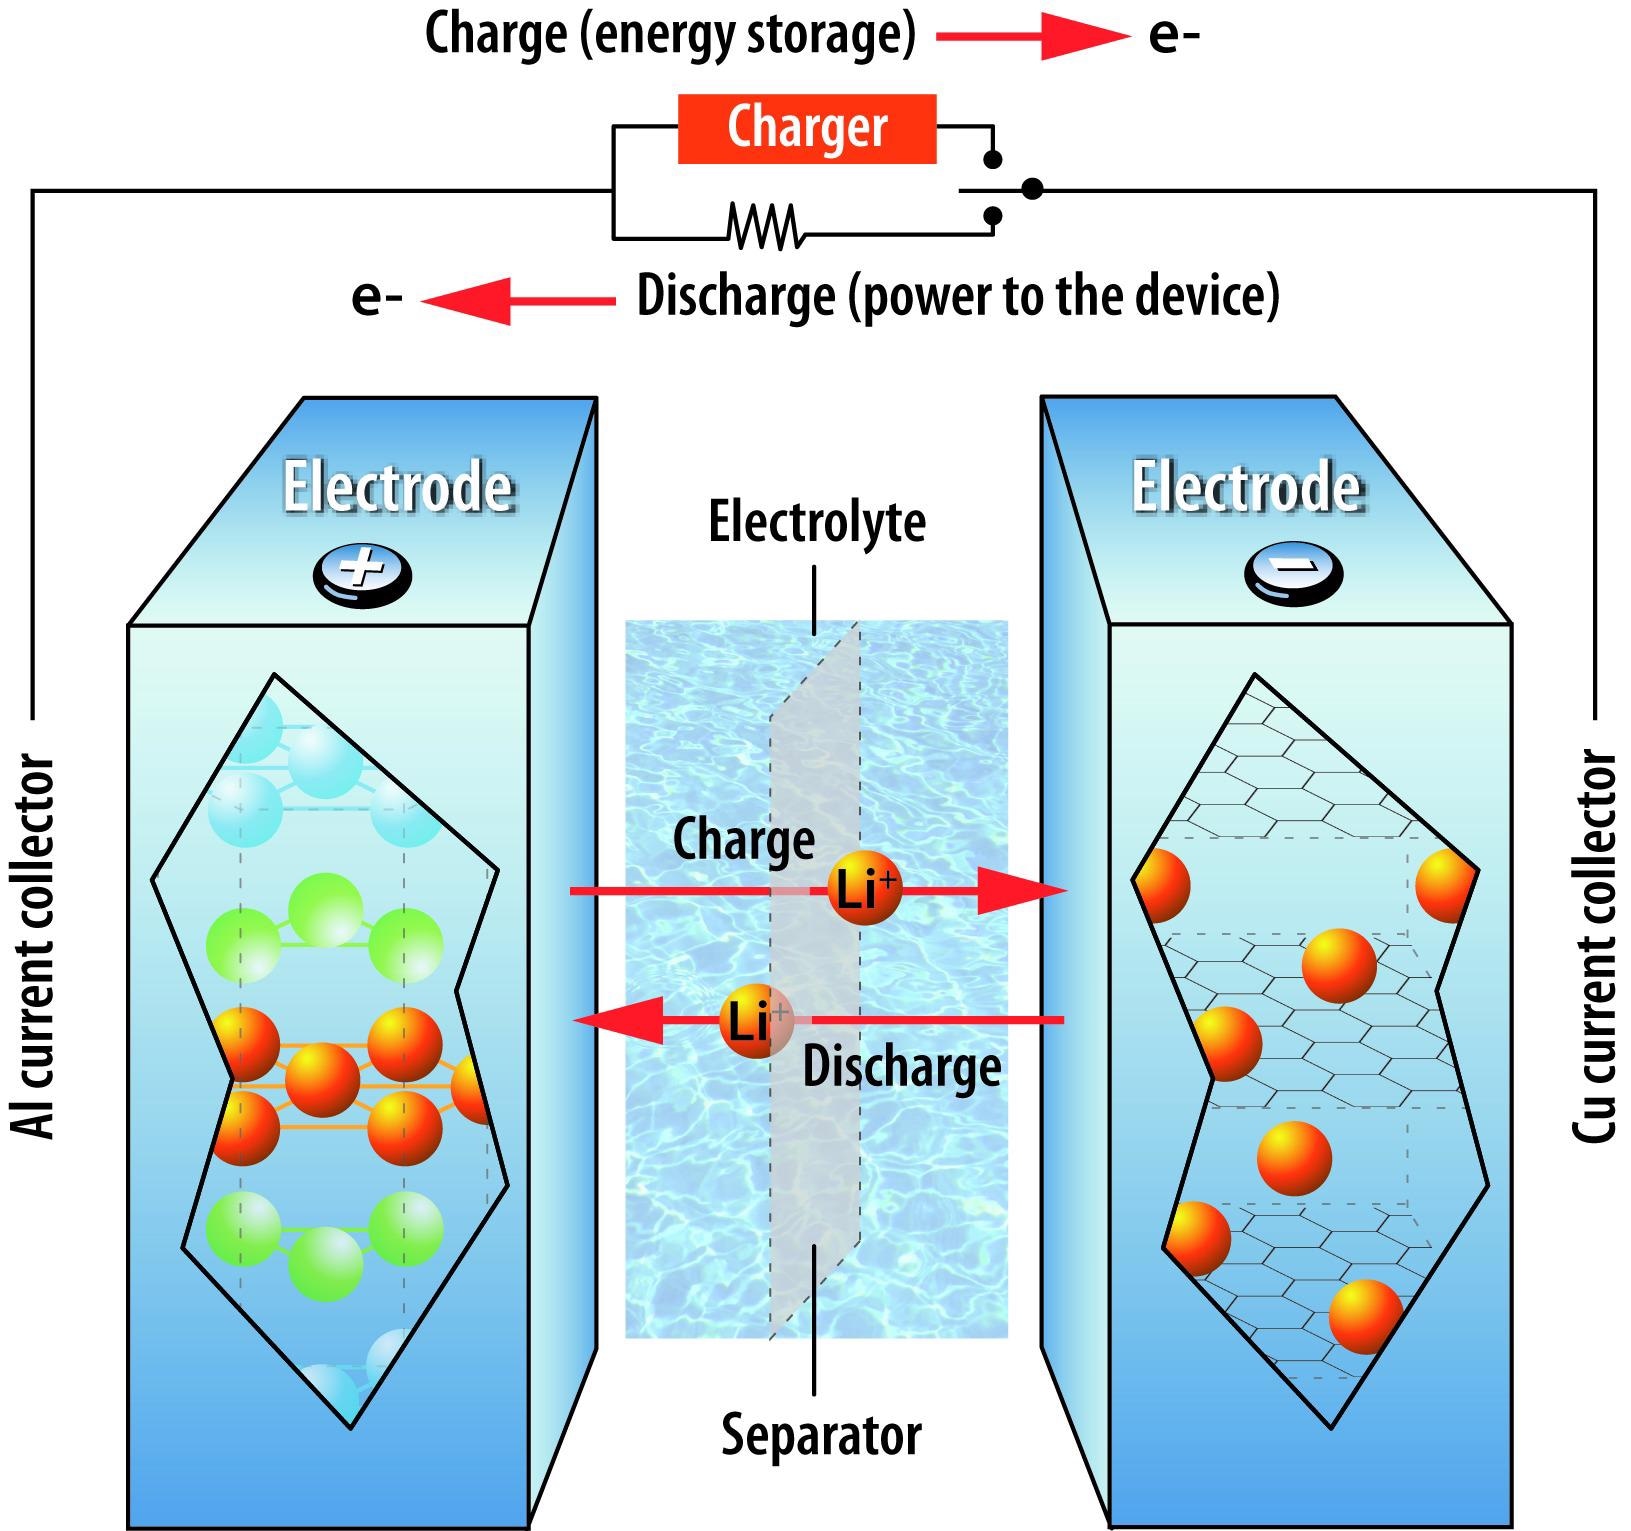 lithium ion, lithium ion batteries, charging, battery charging, fast charging, electric vehicles